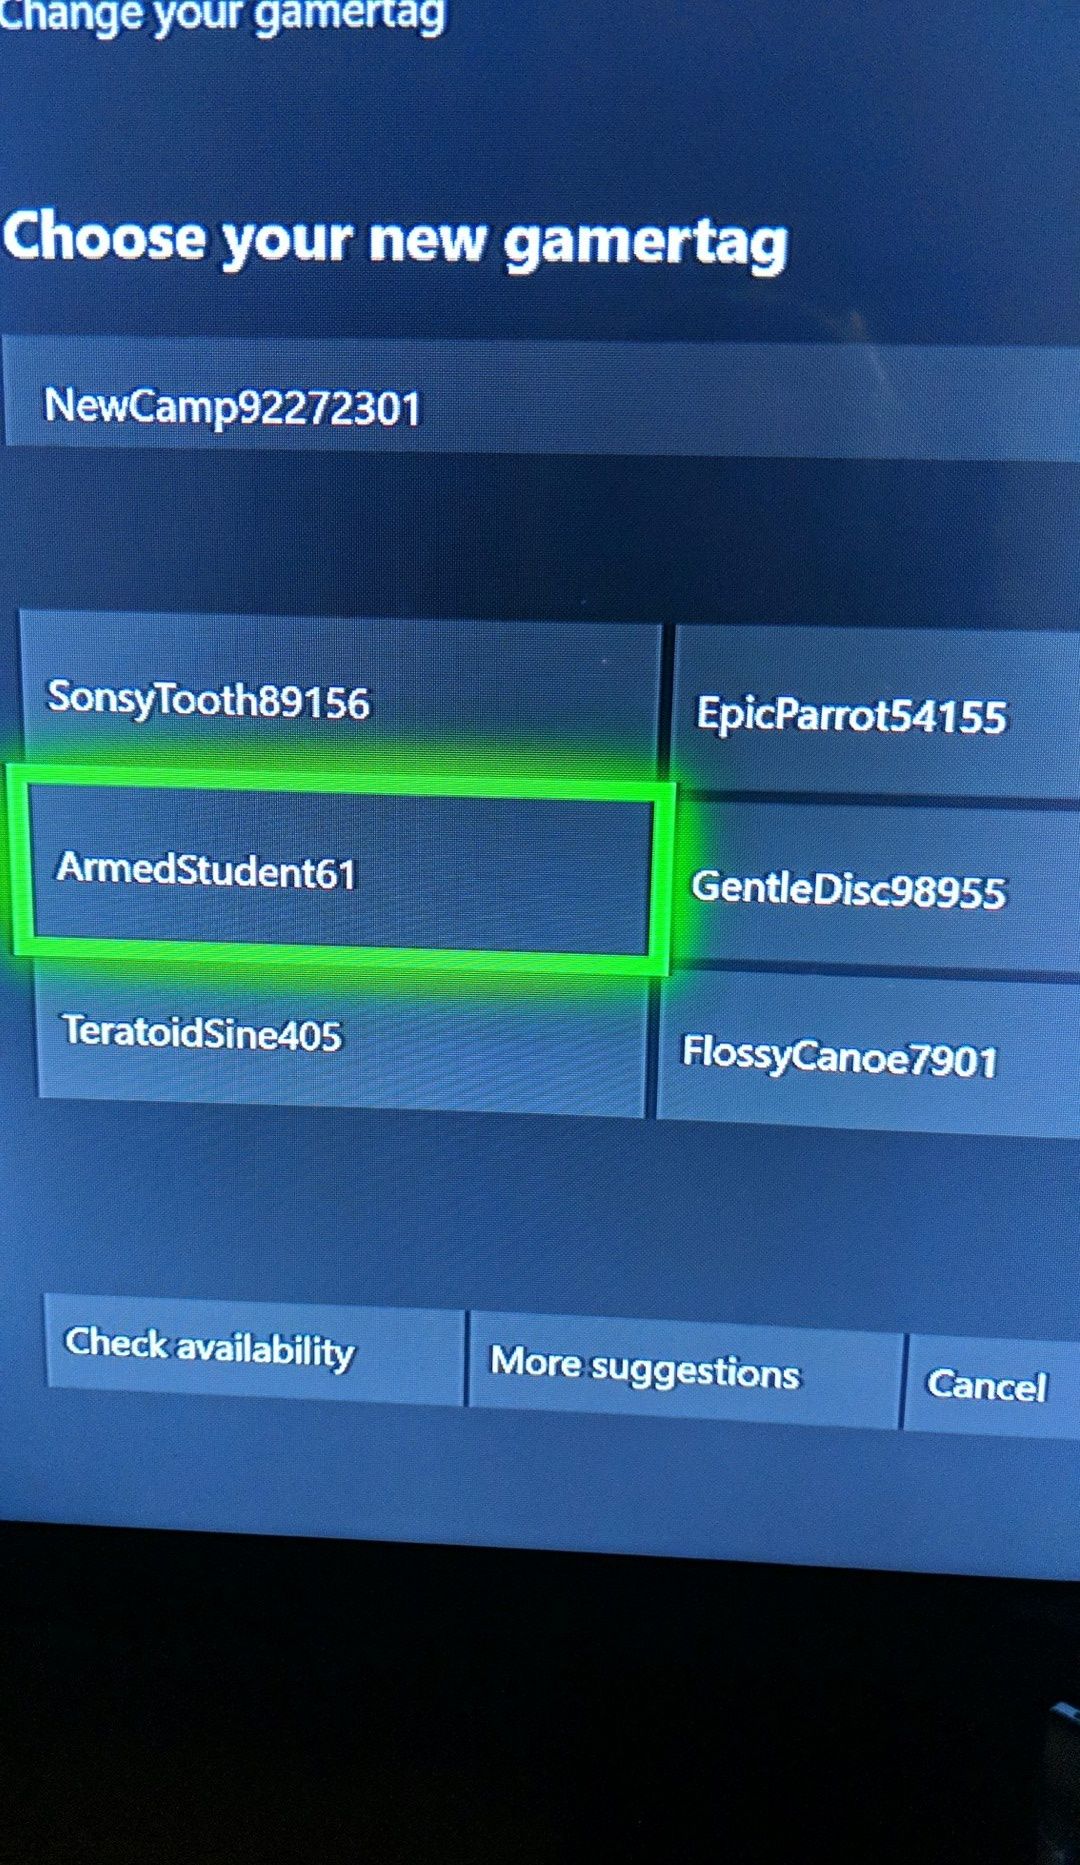 My Xbox trying to suggest gamertags...